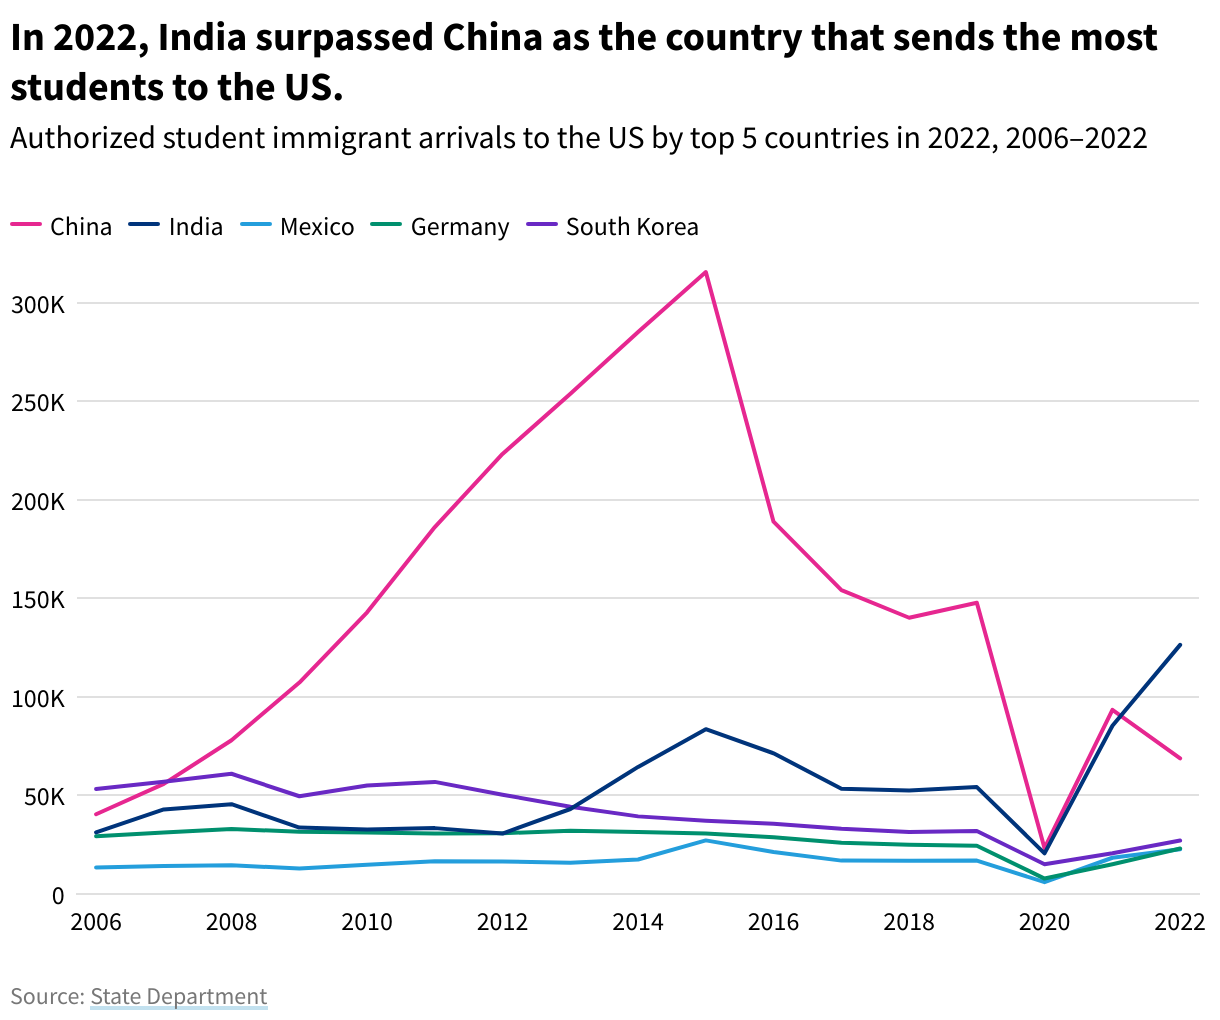 Line chart of authorized student immigrant arrivals to the US from 2006 to 2022, of just the top 5 countries in 2022. The top 5 are India, China, South Korea, Germany, and Mexico.